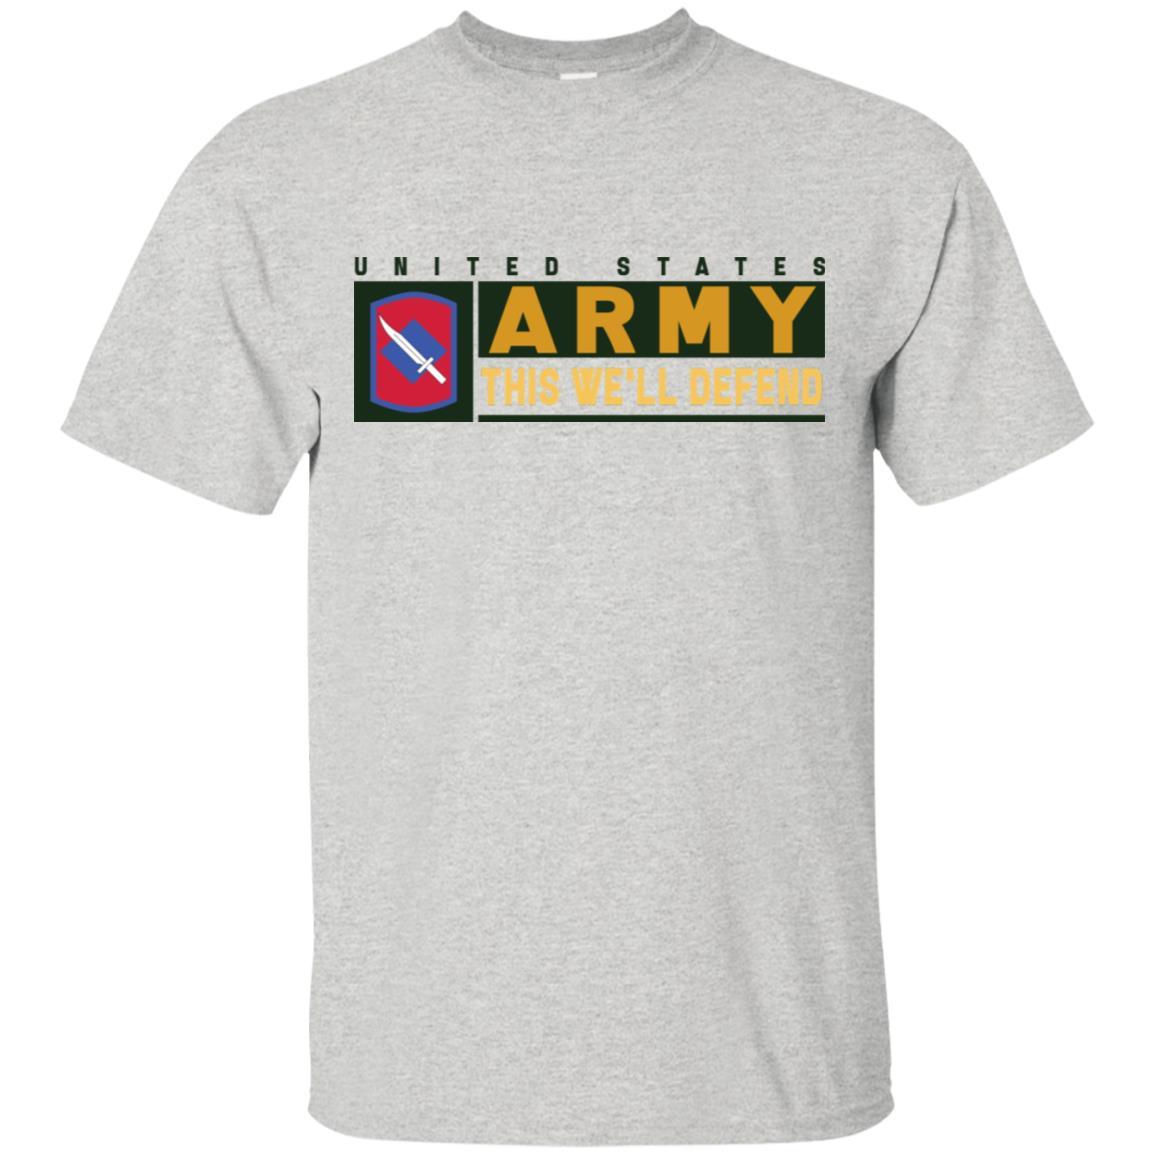 US Army 39TH INFANTRY BRIGADE- This We'll Defend T-Shirt On Front For Men-TShirt-Army-Veterans Nation